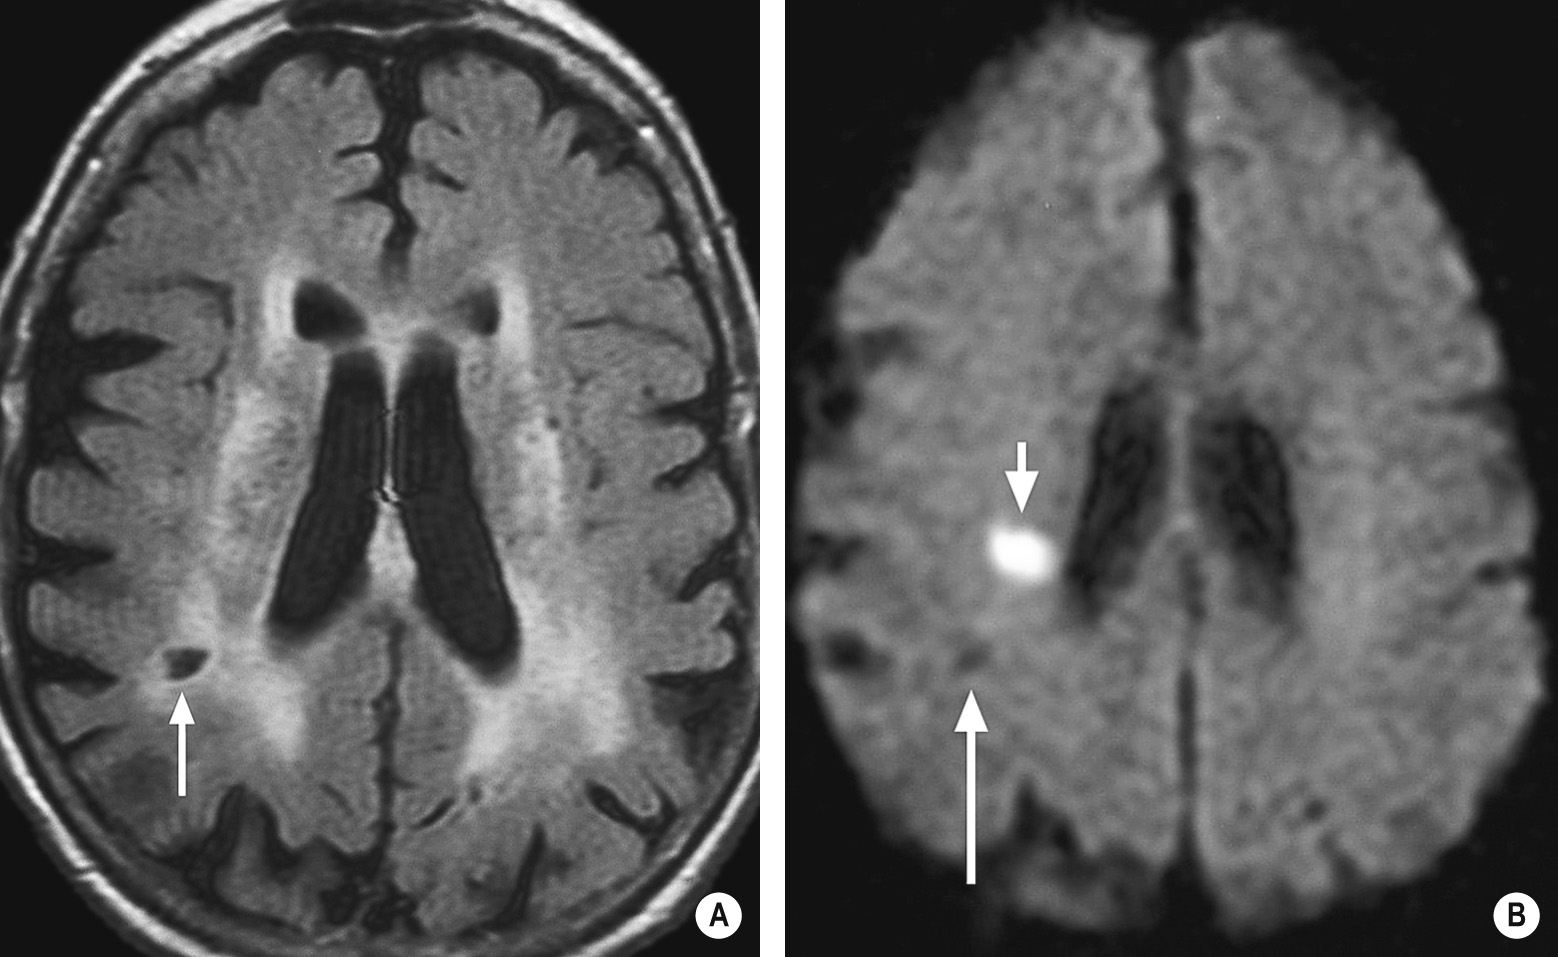 Small vessel disease. (A). Axial FLAIR of a patient shows diffuse high signal indicating small vessel ischaemic change in deep and periventricular cerebral white matter. There is a mature lacunar infarct in the right parietal lobe (arrow). (B). Axial DWI shows an acute infarct as high signal (short arrow) and the mature lacuna as low signal (long arrow). Only DWI can differentiate the acute infarct from the surrounding signal abnormality. *